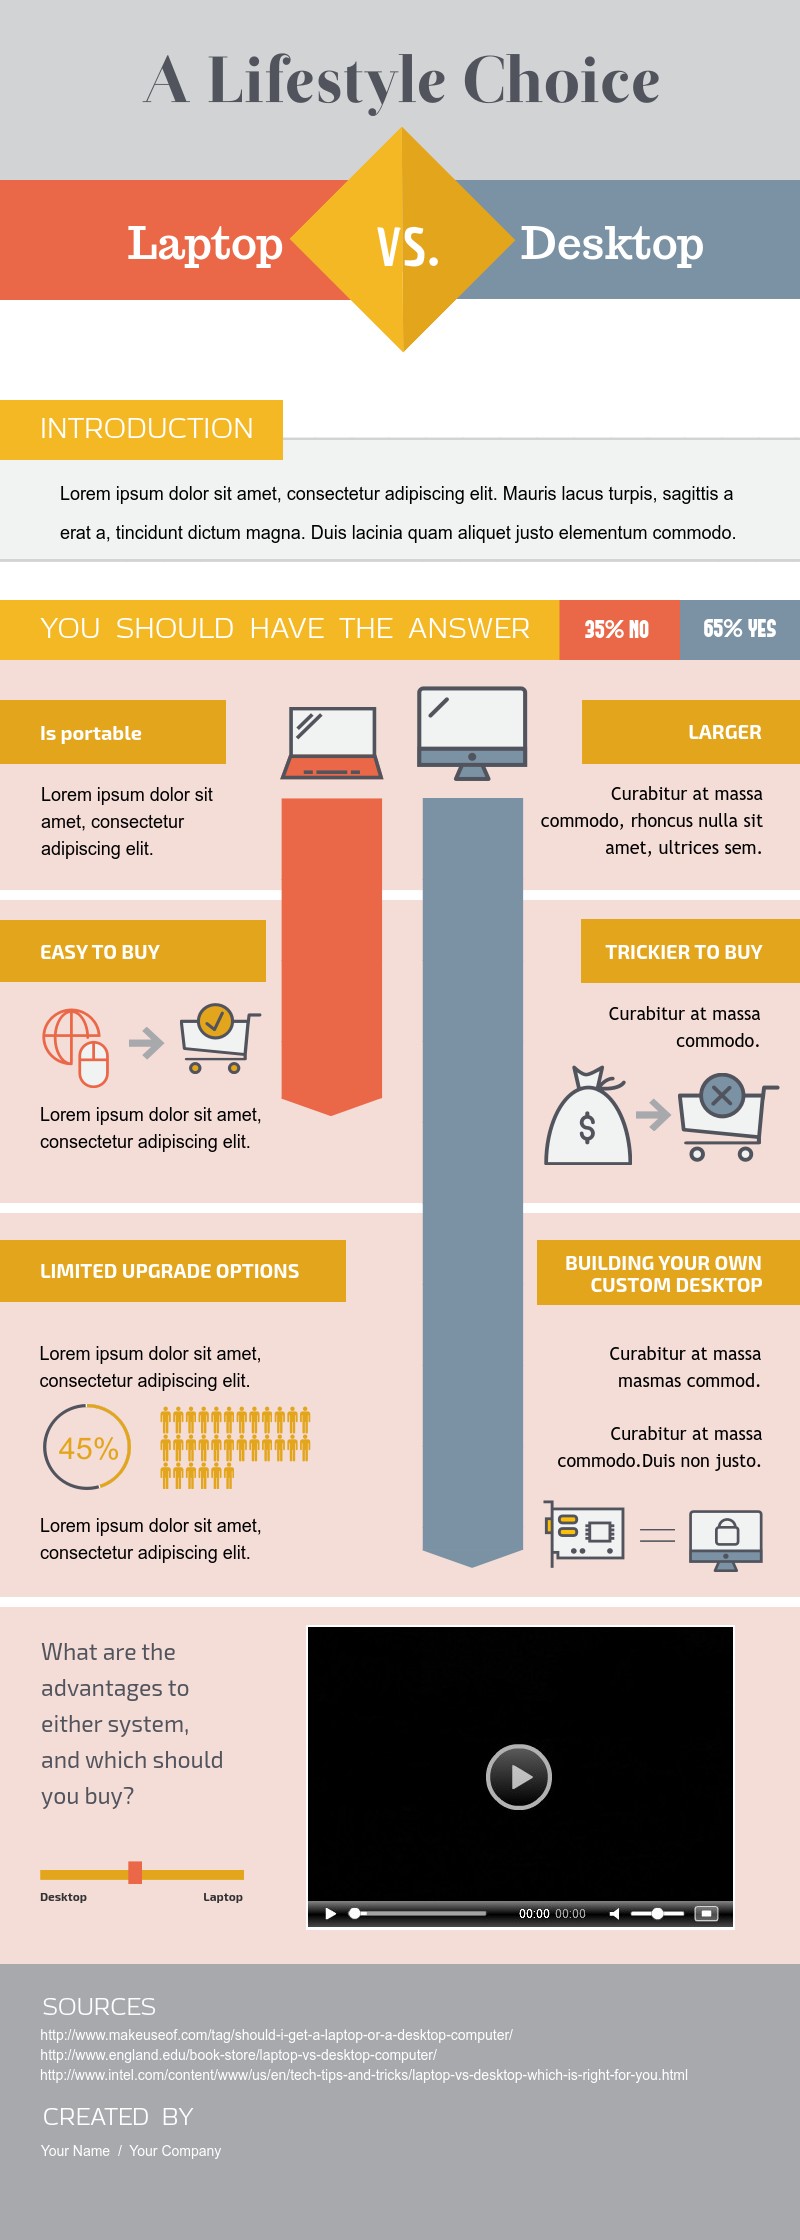 Infographic Design: VIsme Introduces 20+ New Comparison Infographic Templates | Visual Learning ...